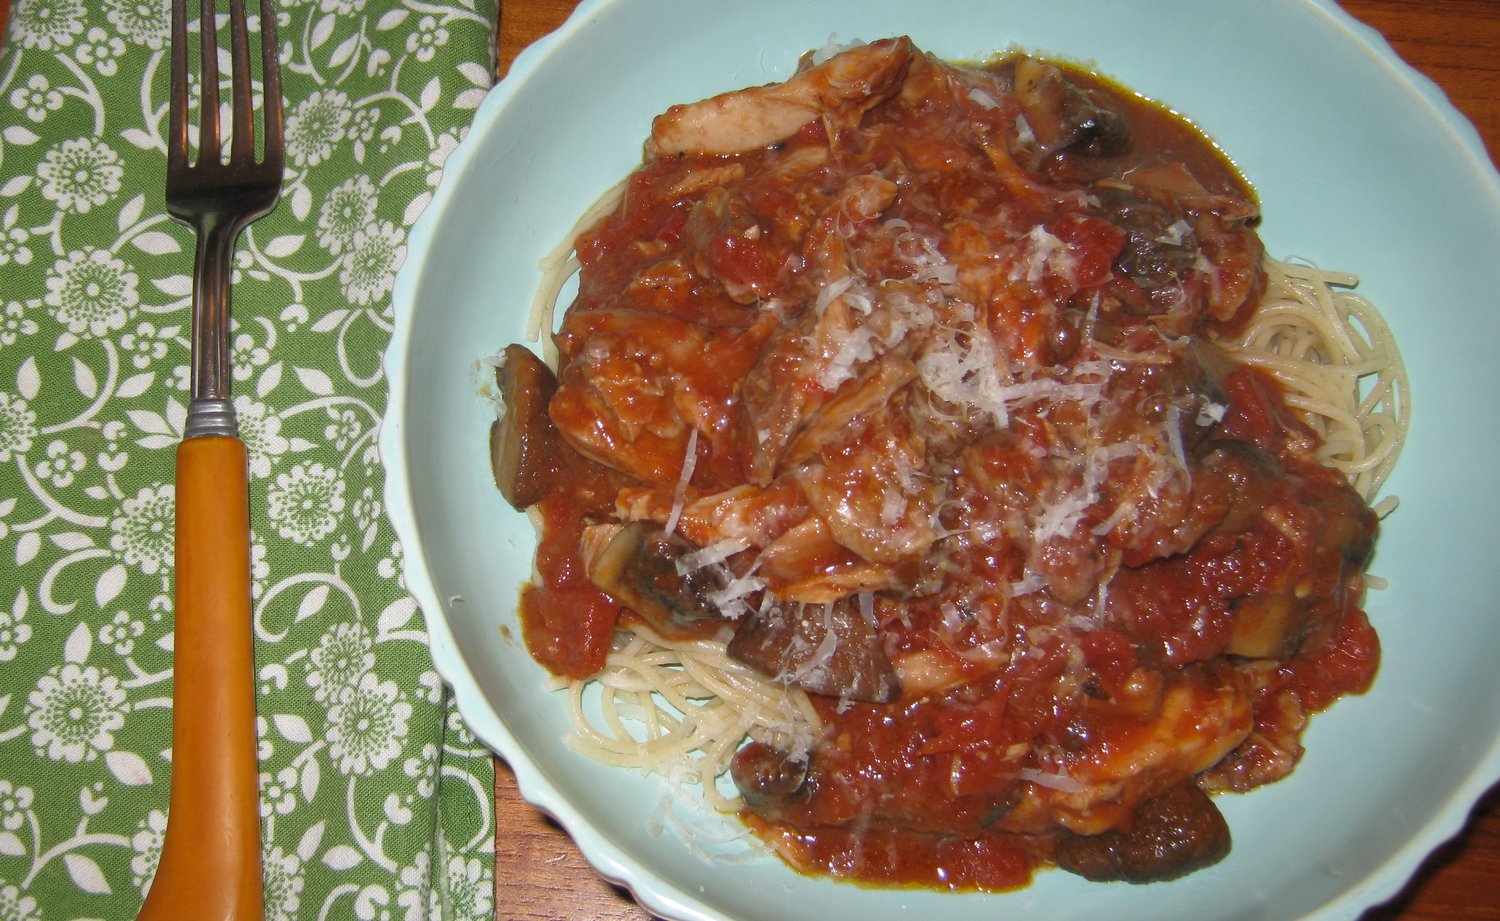 In Italy, “hunter-style,” or alla cacciatora, is a technique used for preparing fowl. It is fairly simple, suggesting the recipe was used by the hunters themselves.